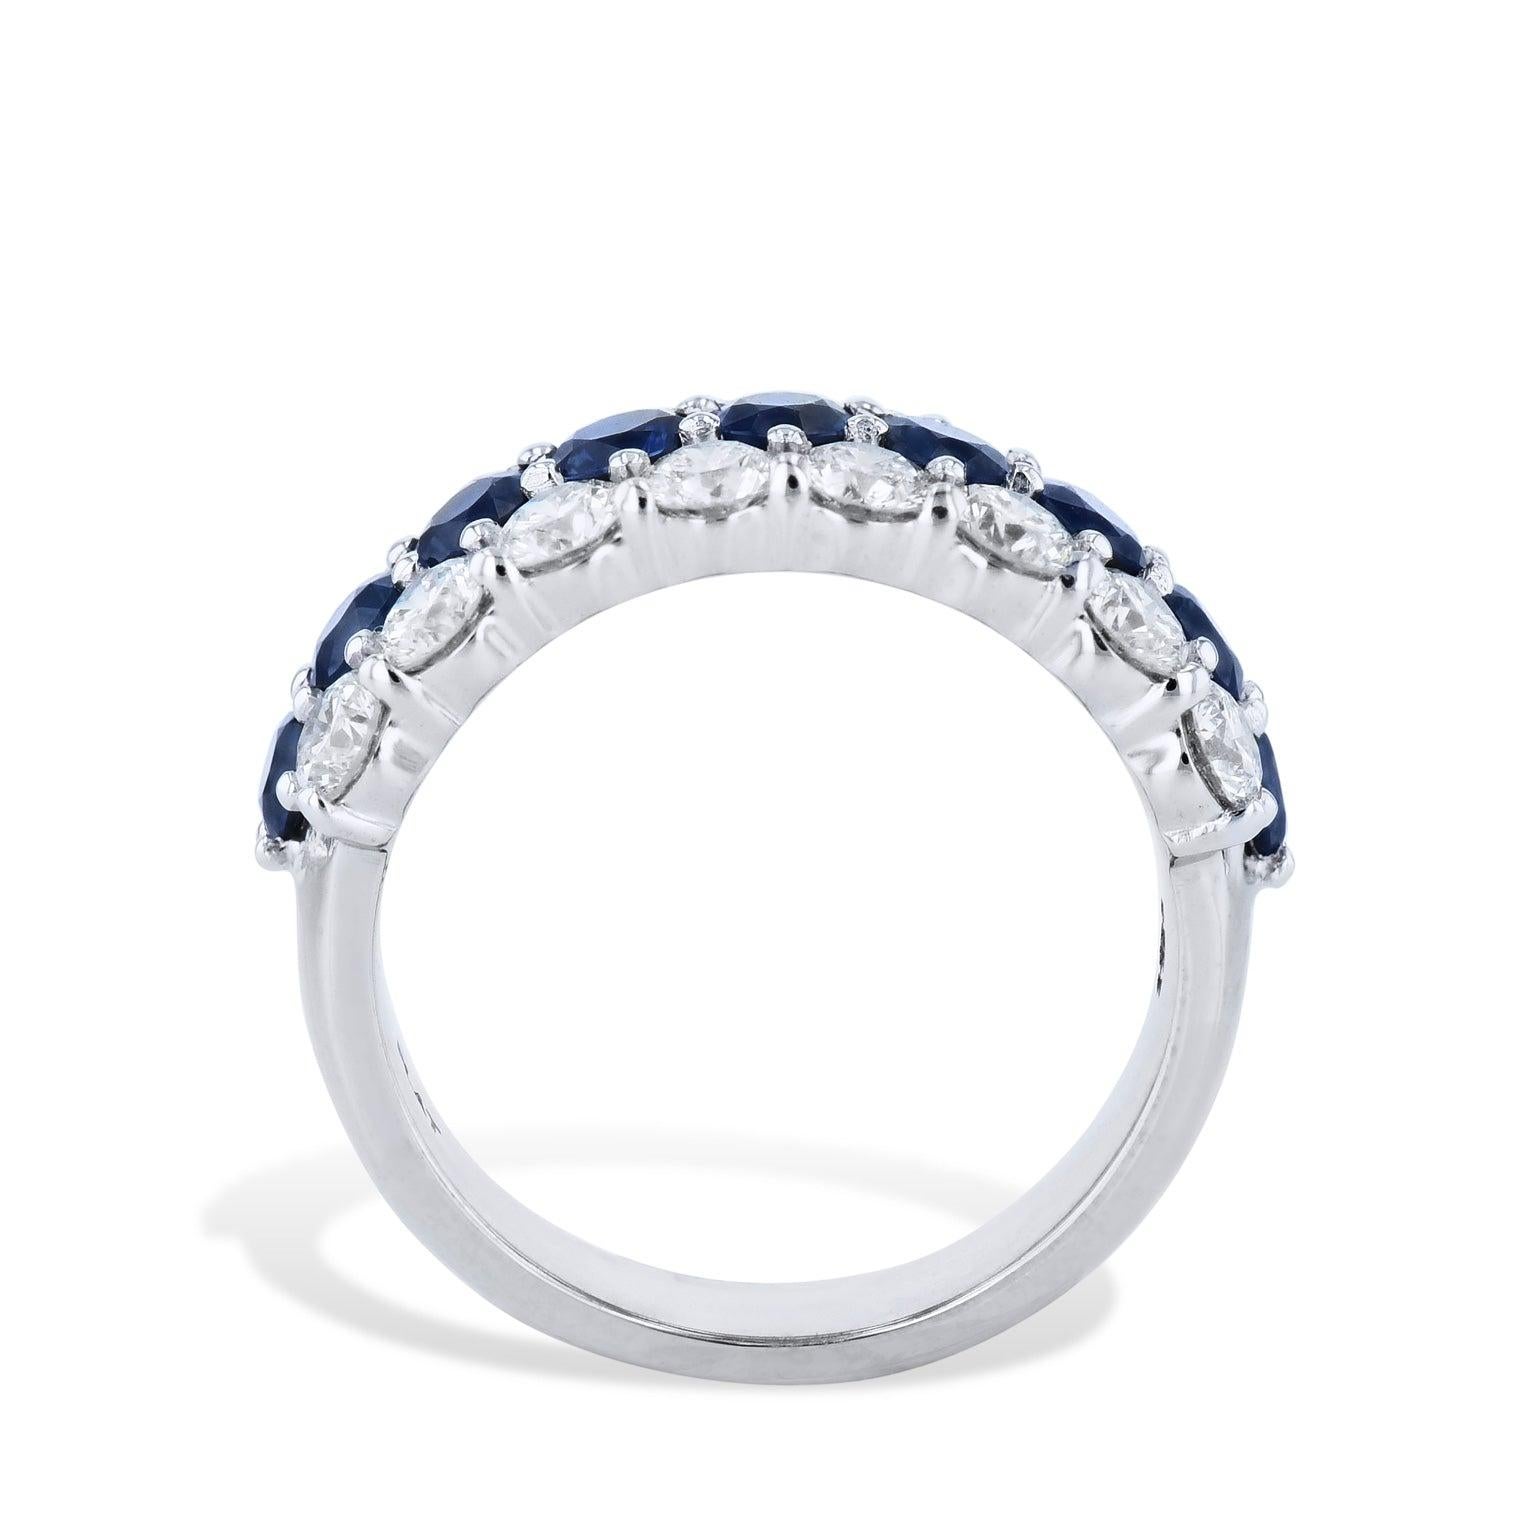 Elevate your style in extraordinary ways with this stunning Diamond and Sapphire Three Row Band. 
Crafted from shining Platinum, it features a beautiful combination of Diamonds and Round Sapphires for an unforgettable sparkle.

Diamond and Sapphire